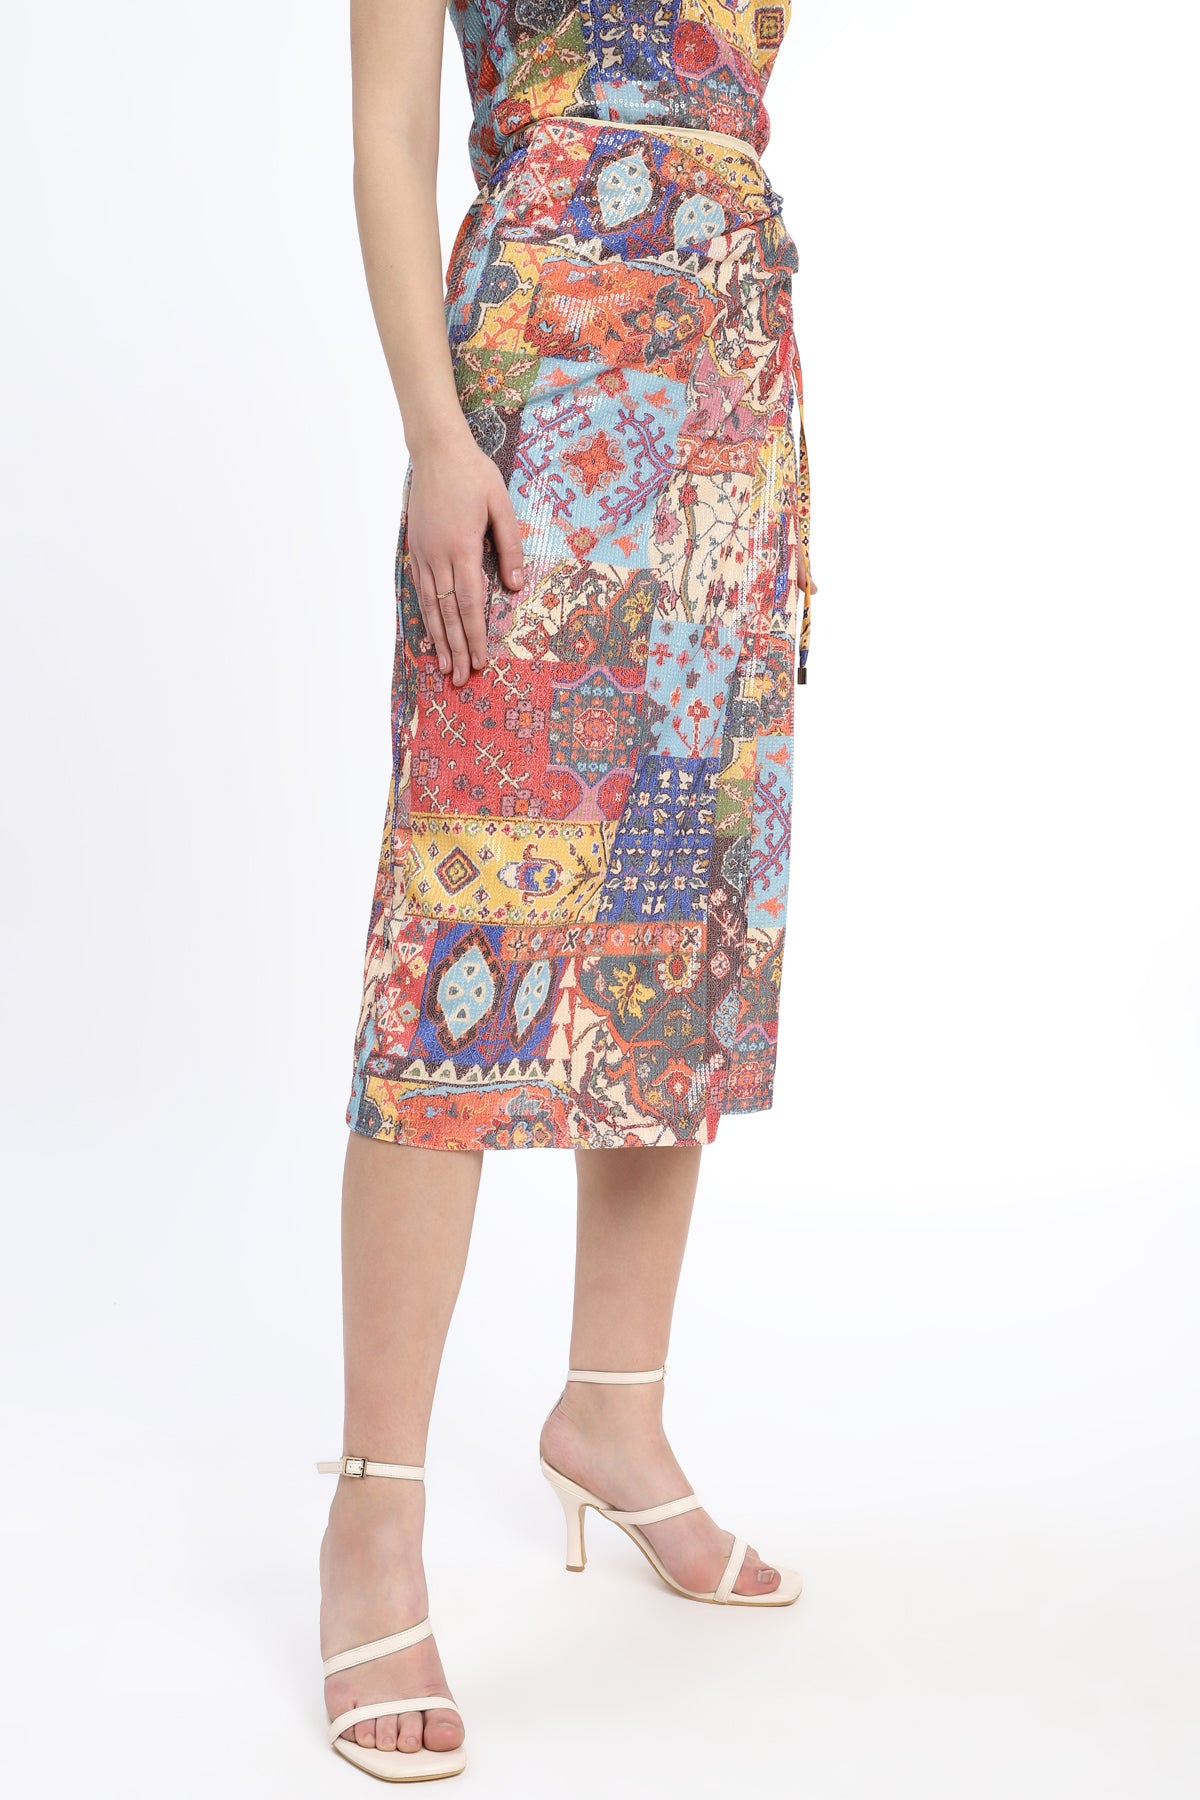 Beautiful Printed sequins skirt with side tie detail